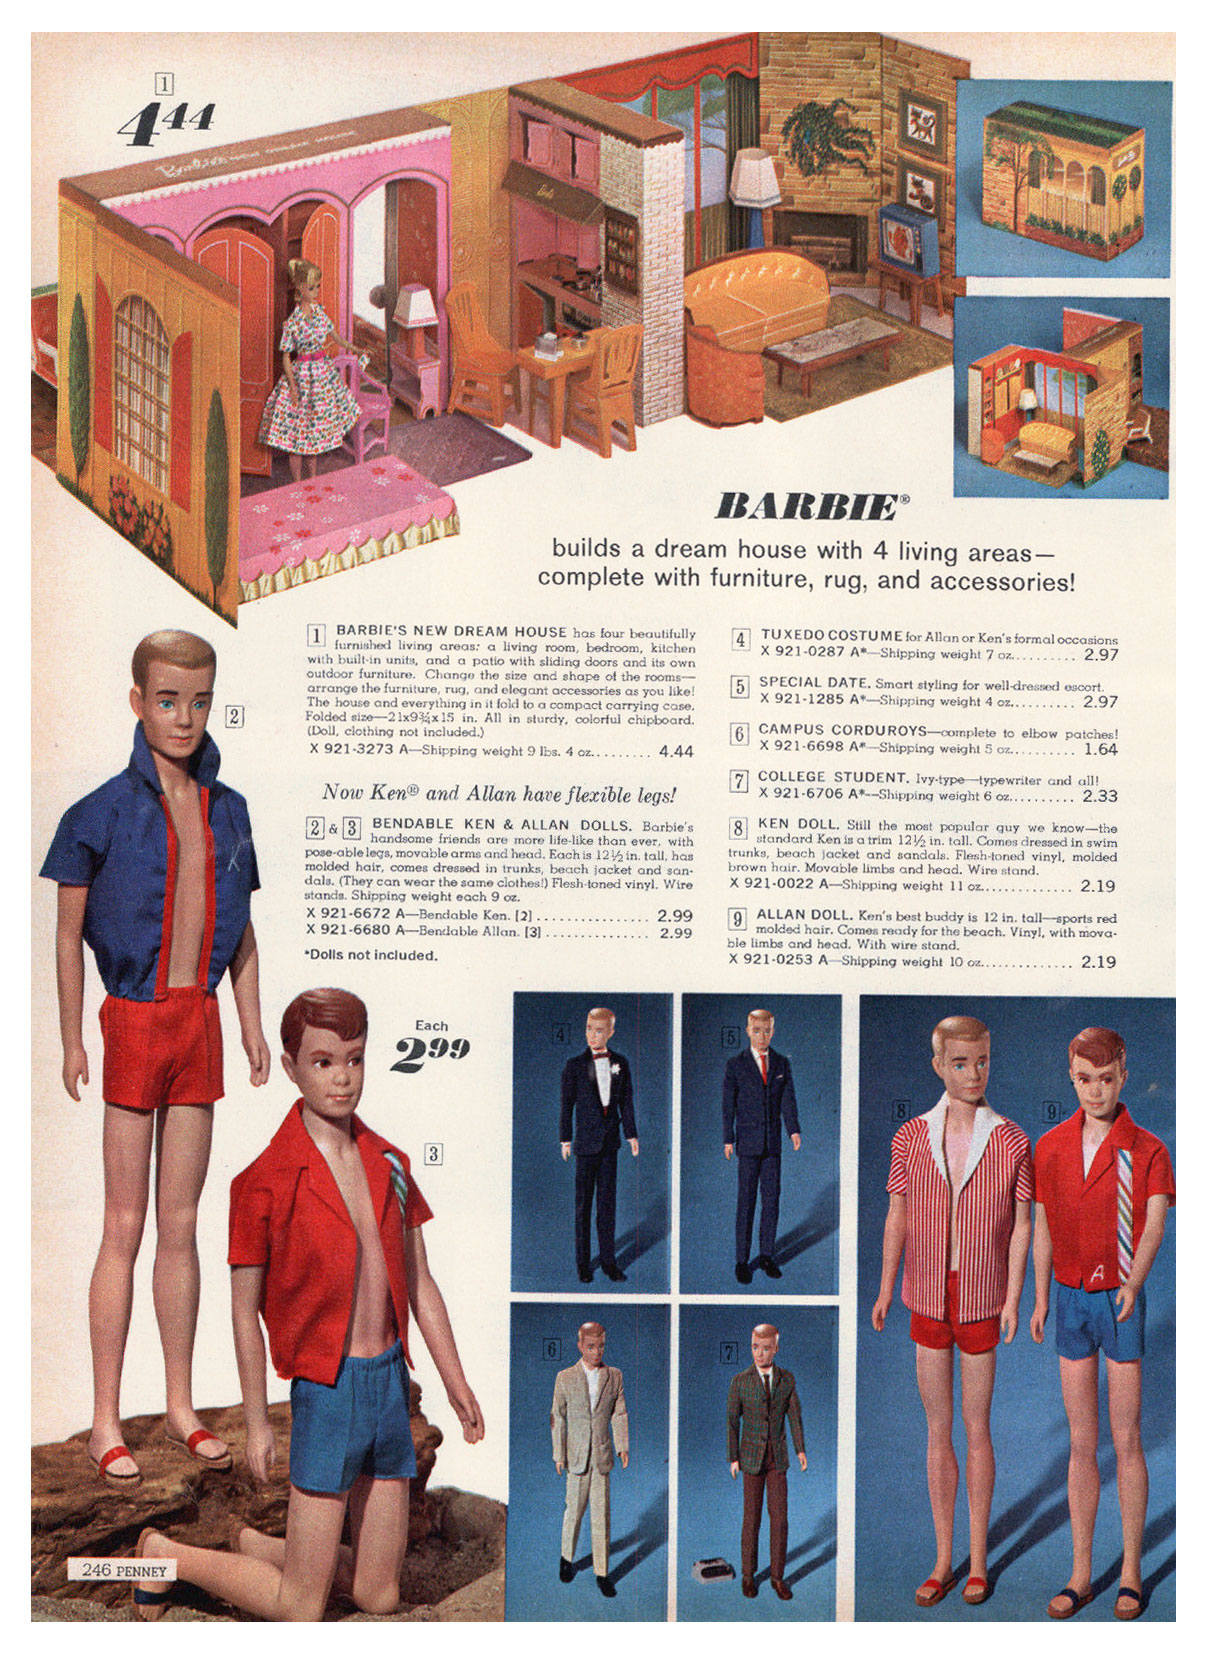 From 1965 Penneys Christmas catalogue